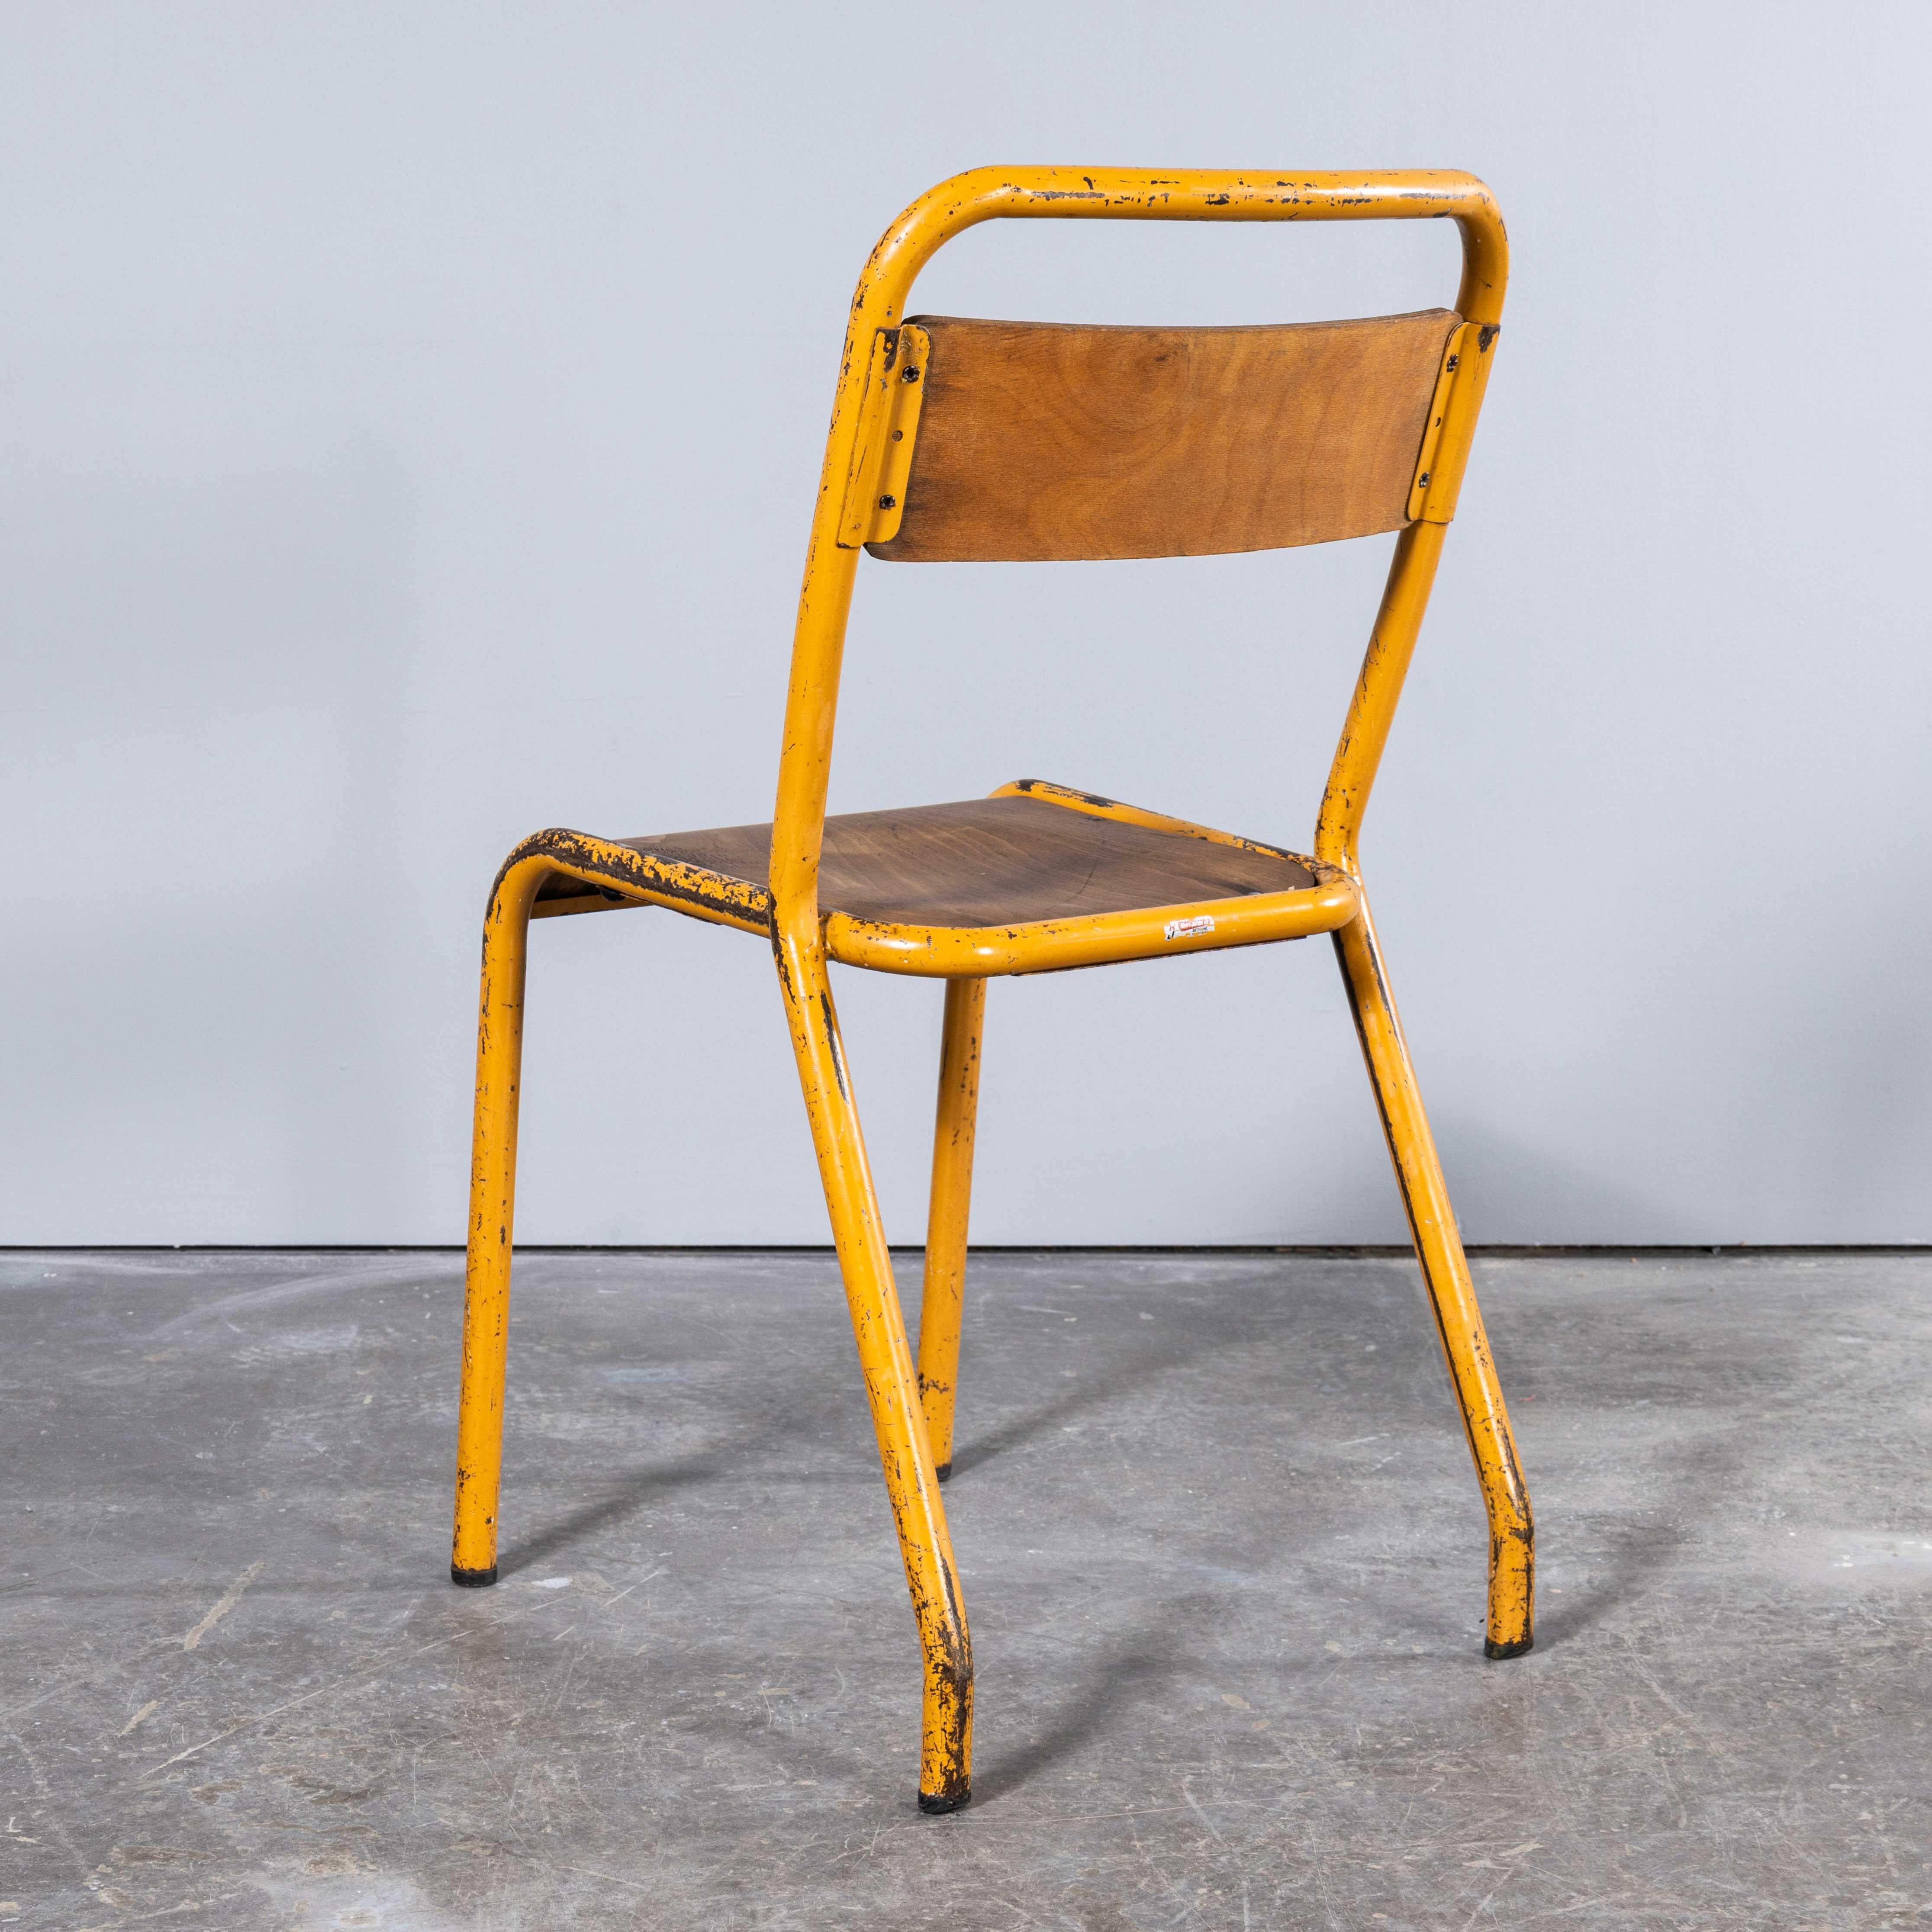 1950's Original Yellow French Tolix Wood Seat Metal Bistro Dining Chair - Large  For Sale 11